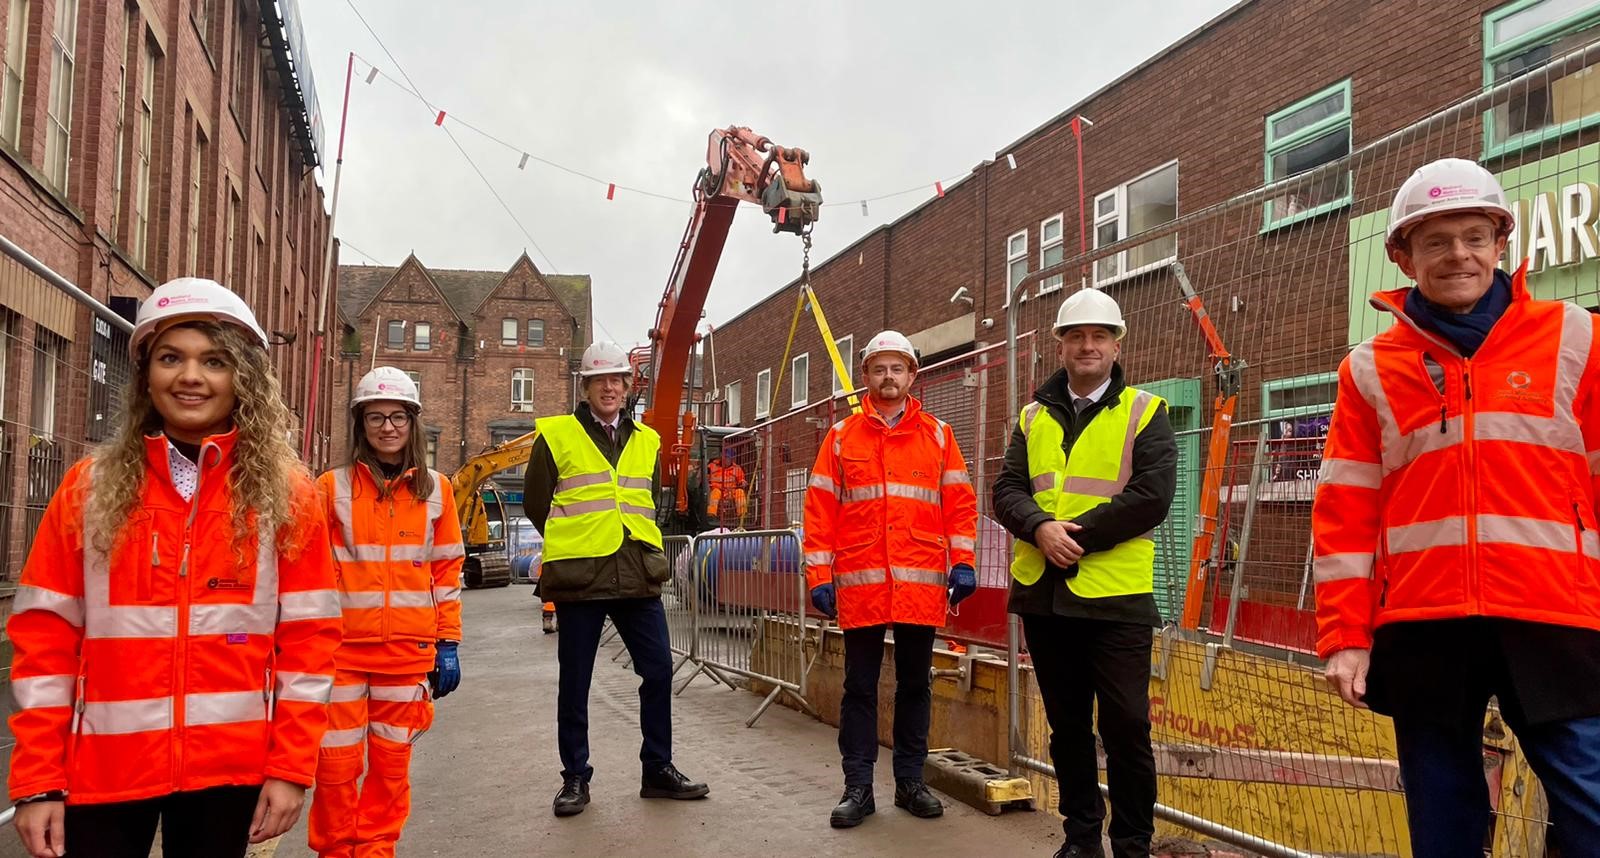 Mayor of the West Midlands Andy Street, joined by James Betjemann, Head of Curzon and Enterprise Zone Development at Birmingham City Council, Matthew Rhodes, Board Director, Greater Birmingham and Solihull Local Enterprise Partnership and workers at the alliance to mark the utility diversions well underway in Digbeth for the Birmingham Eastside Metro extension